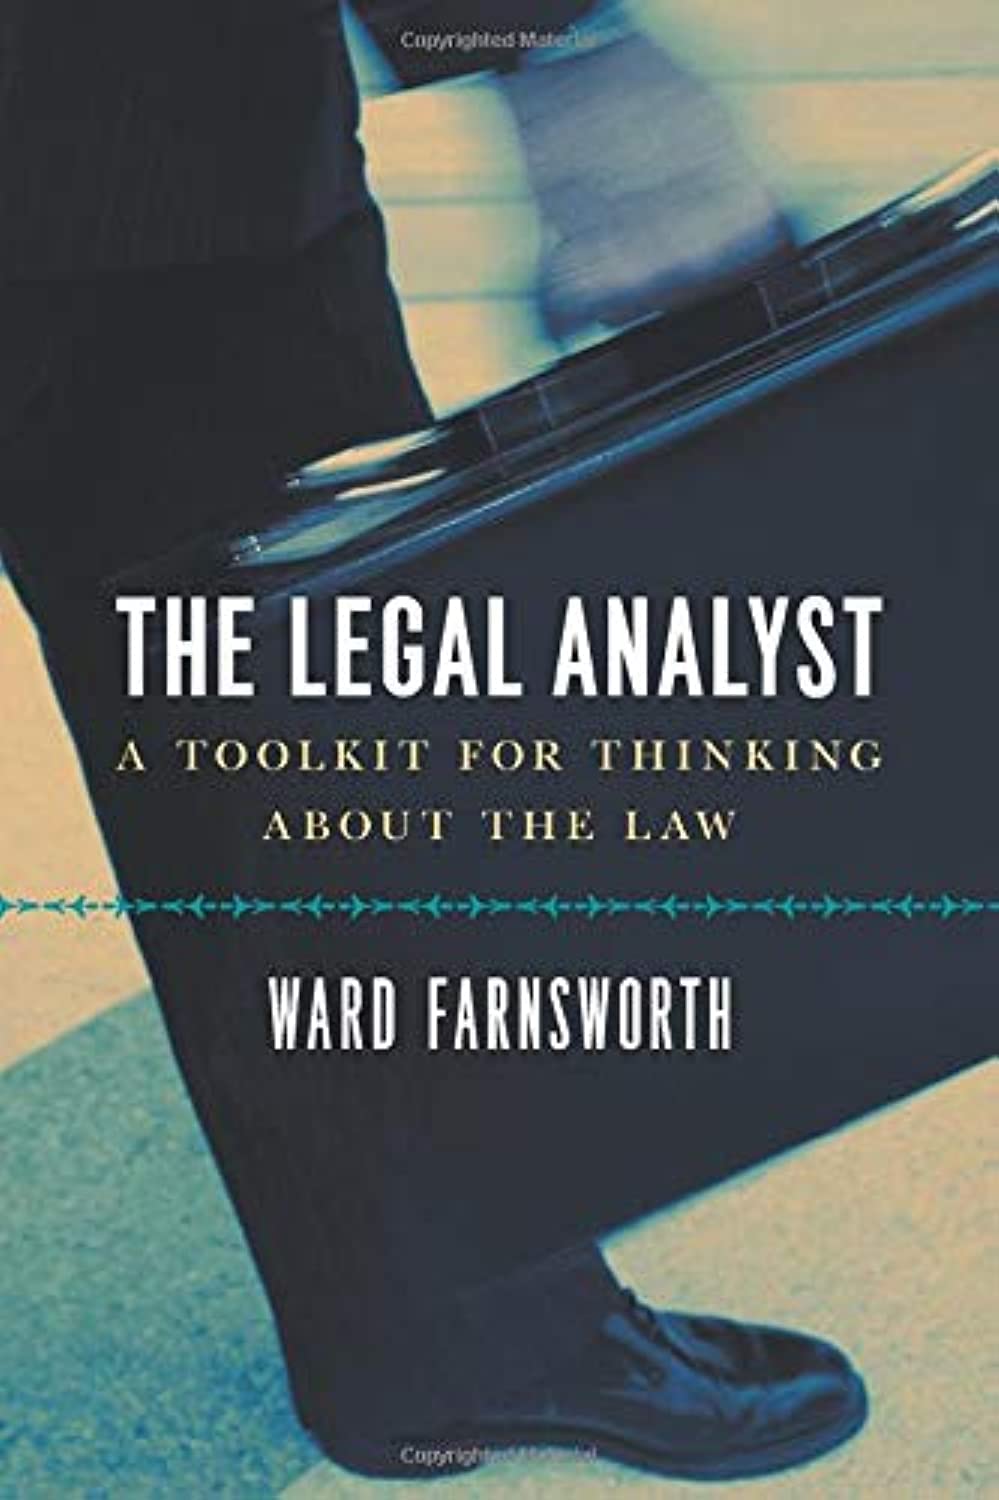 Ward Farnsworth: The Legal Analyst (Hardcover, 2007, University Of Chicago Press)